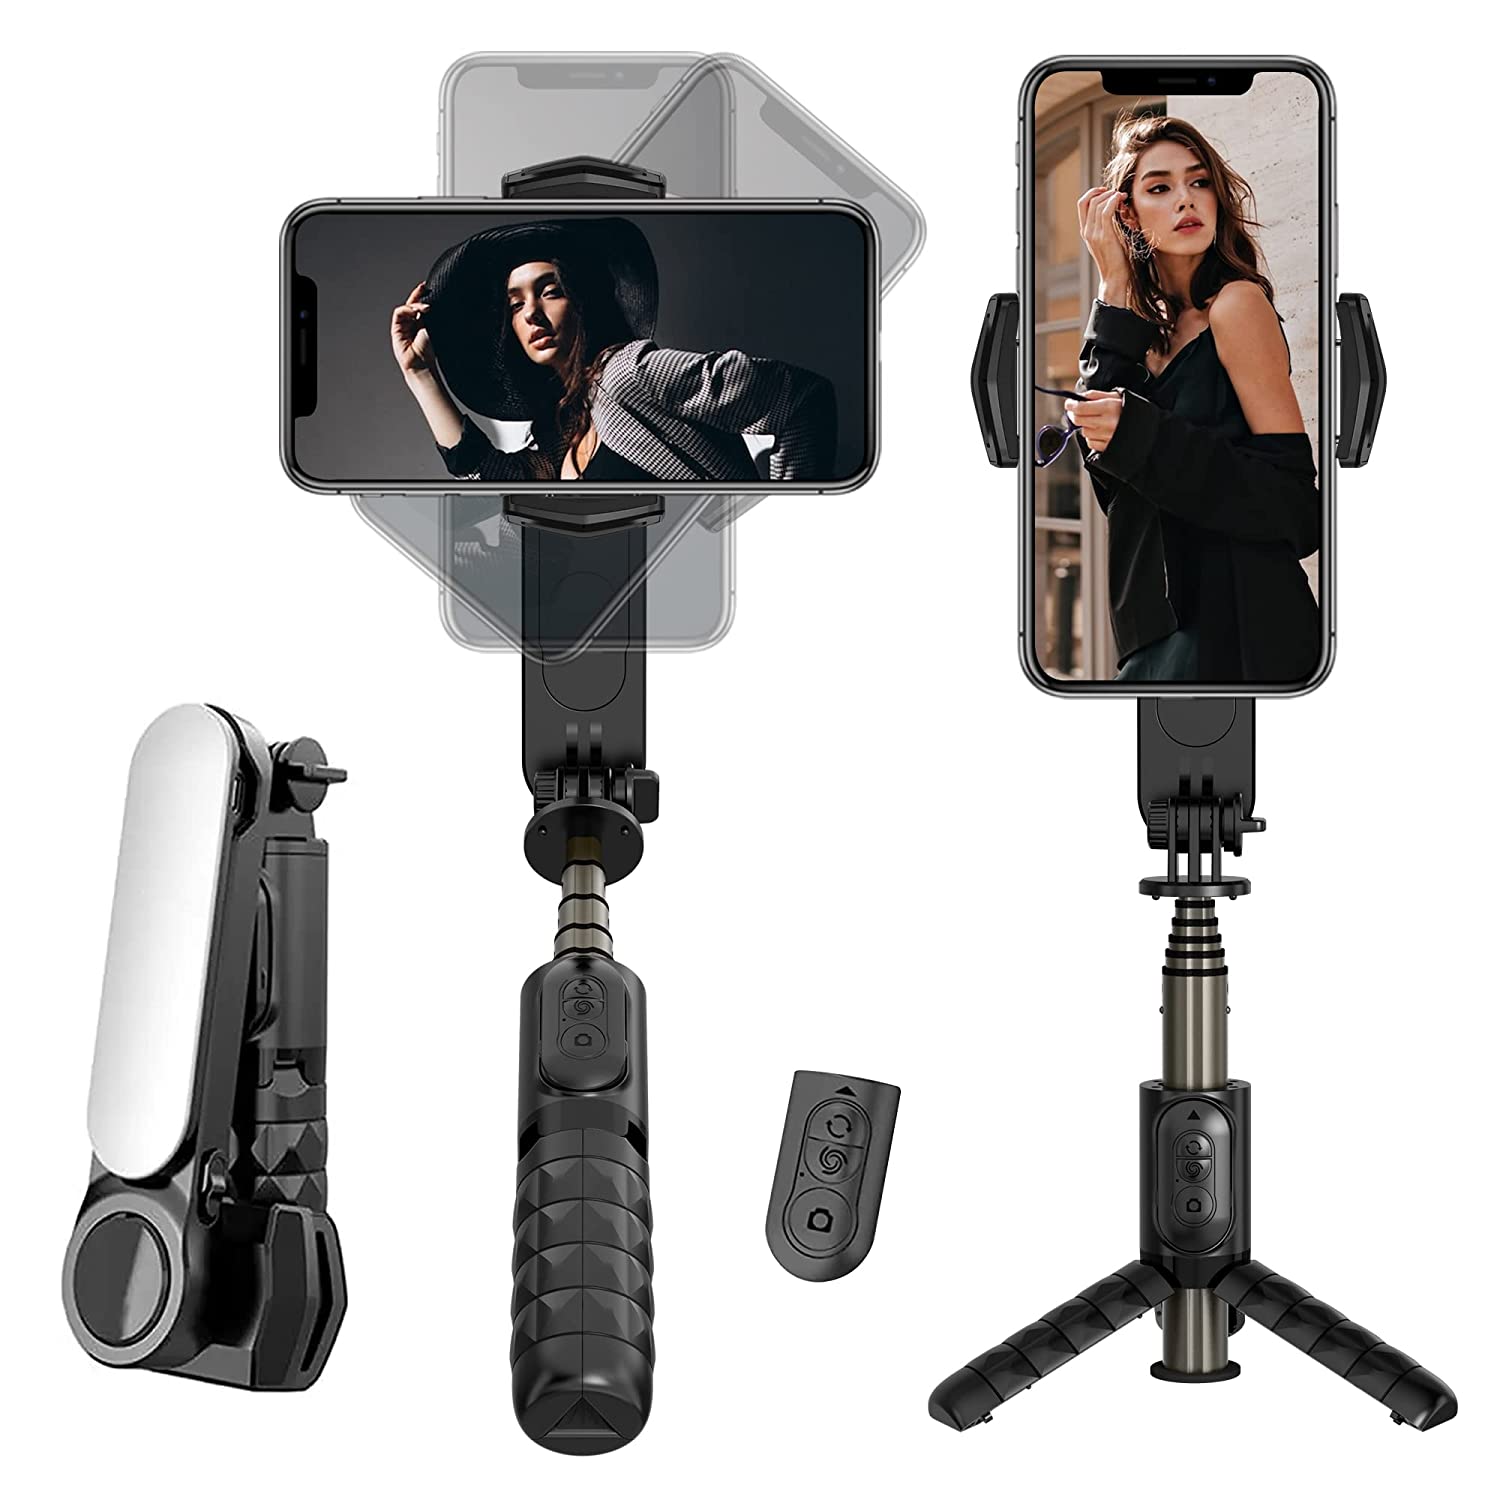 ECellStreet Foldable Mini Handheld Selfie Stick Tripod Smartphone 1-Axis Gimbal Stabilizer with Multifunction Remote 360?Automatic Rotation for iPhone Android